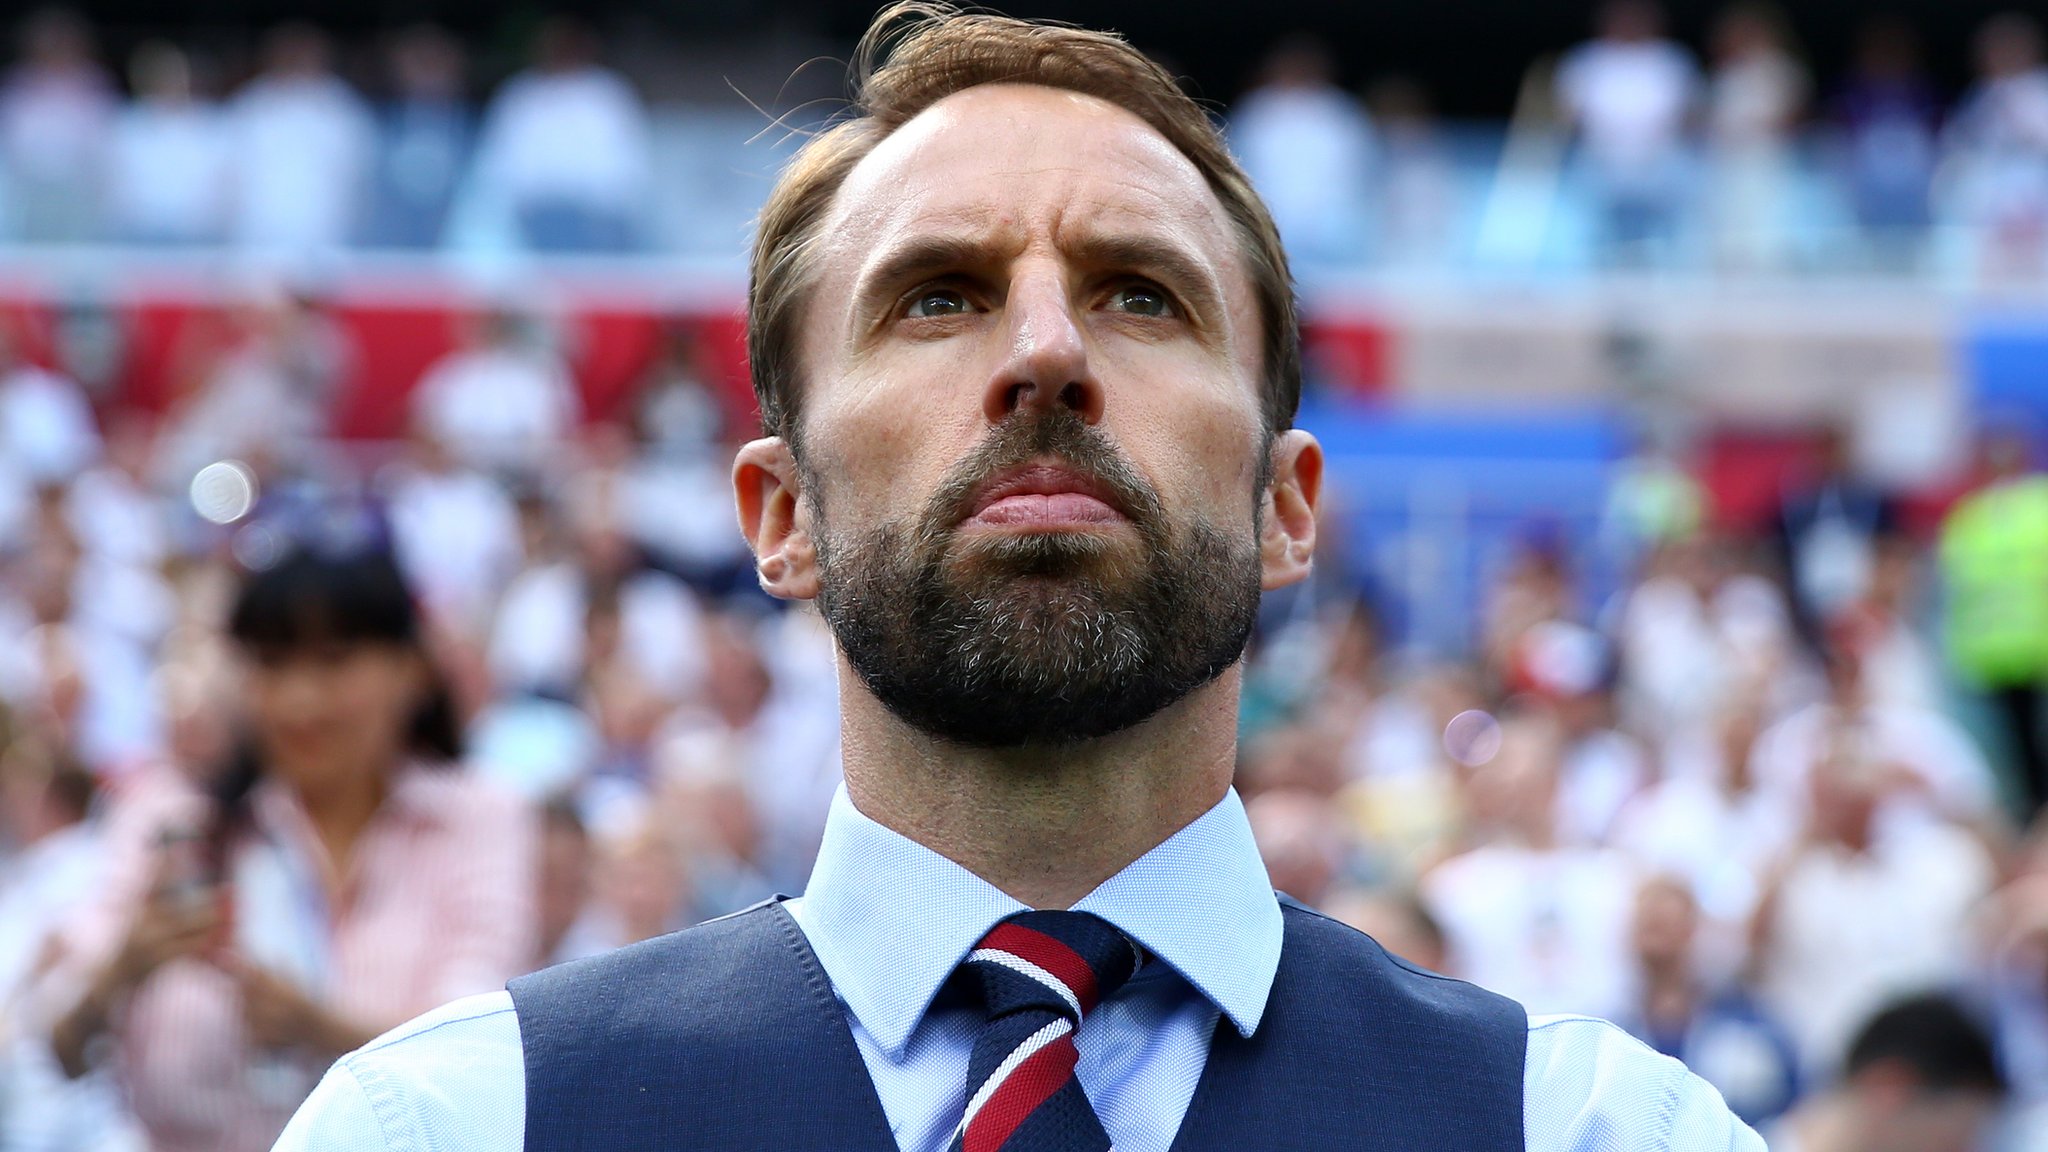 England learned from Spain, Germany and the NFL - Southgate